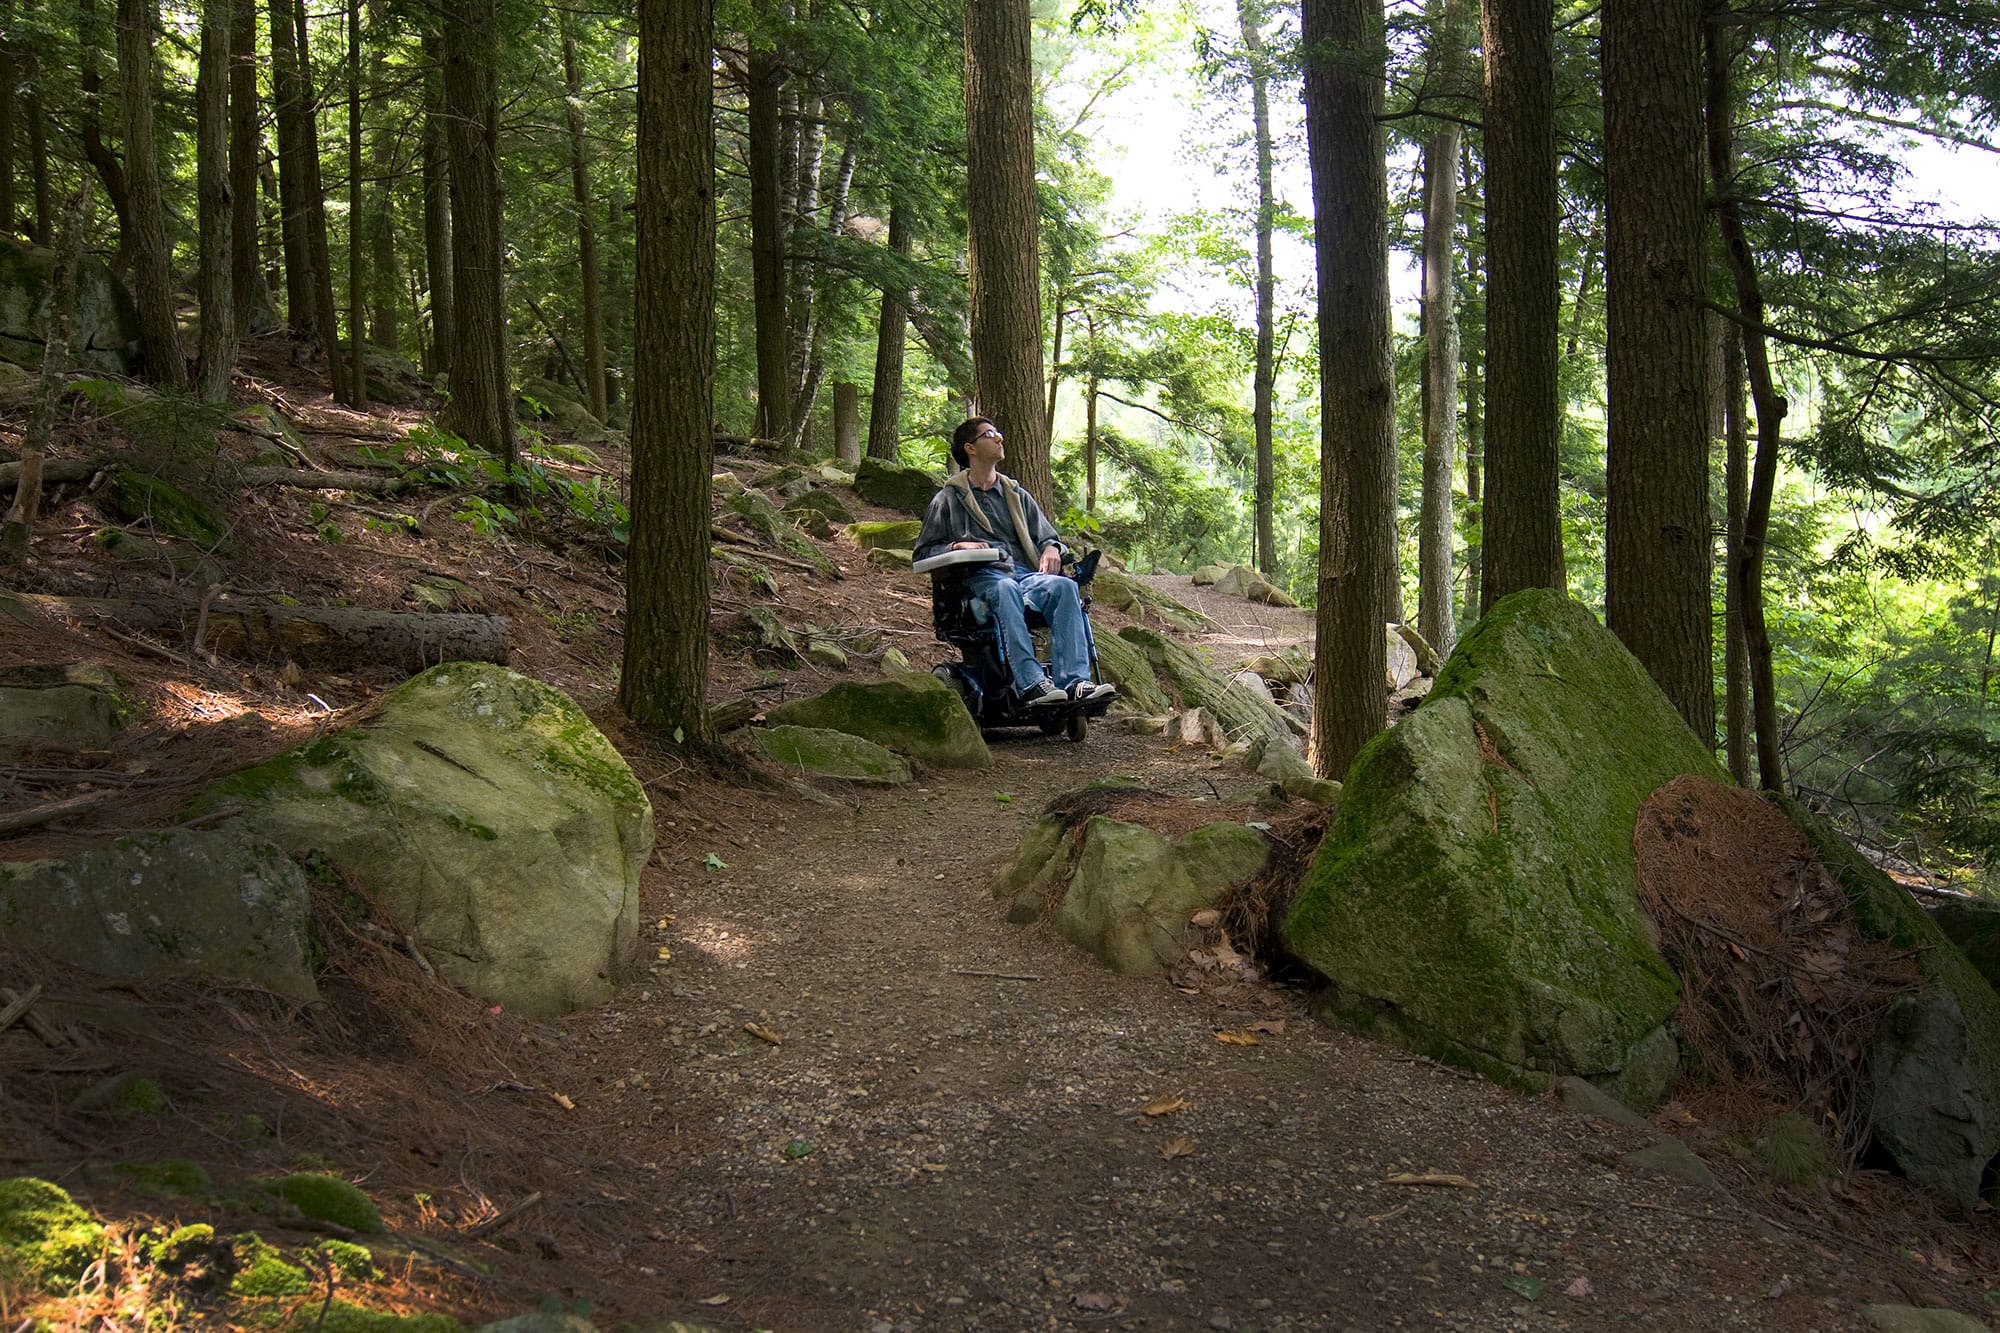 A person in a wheelchair on a trail in the woods.